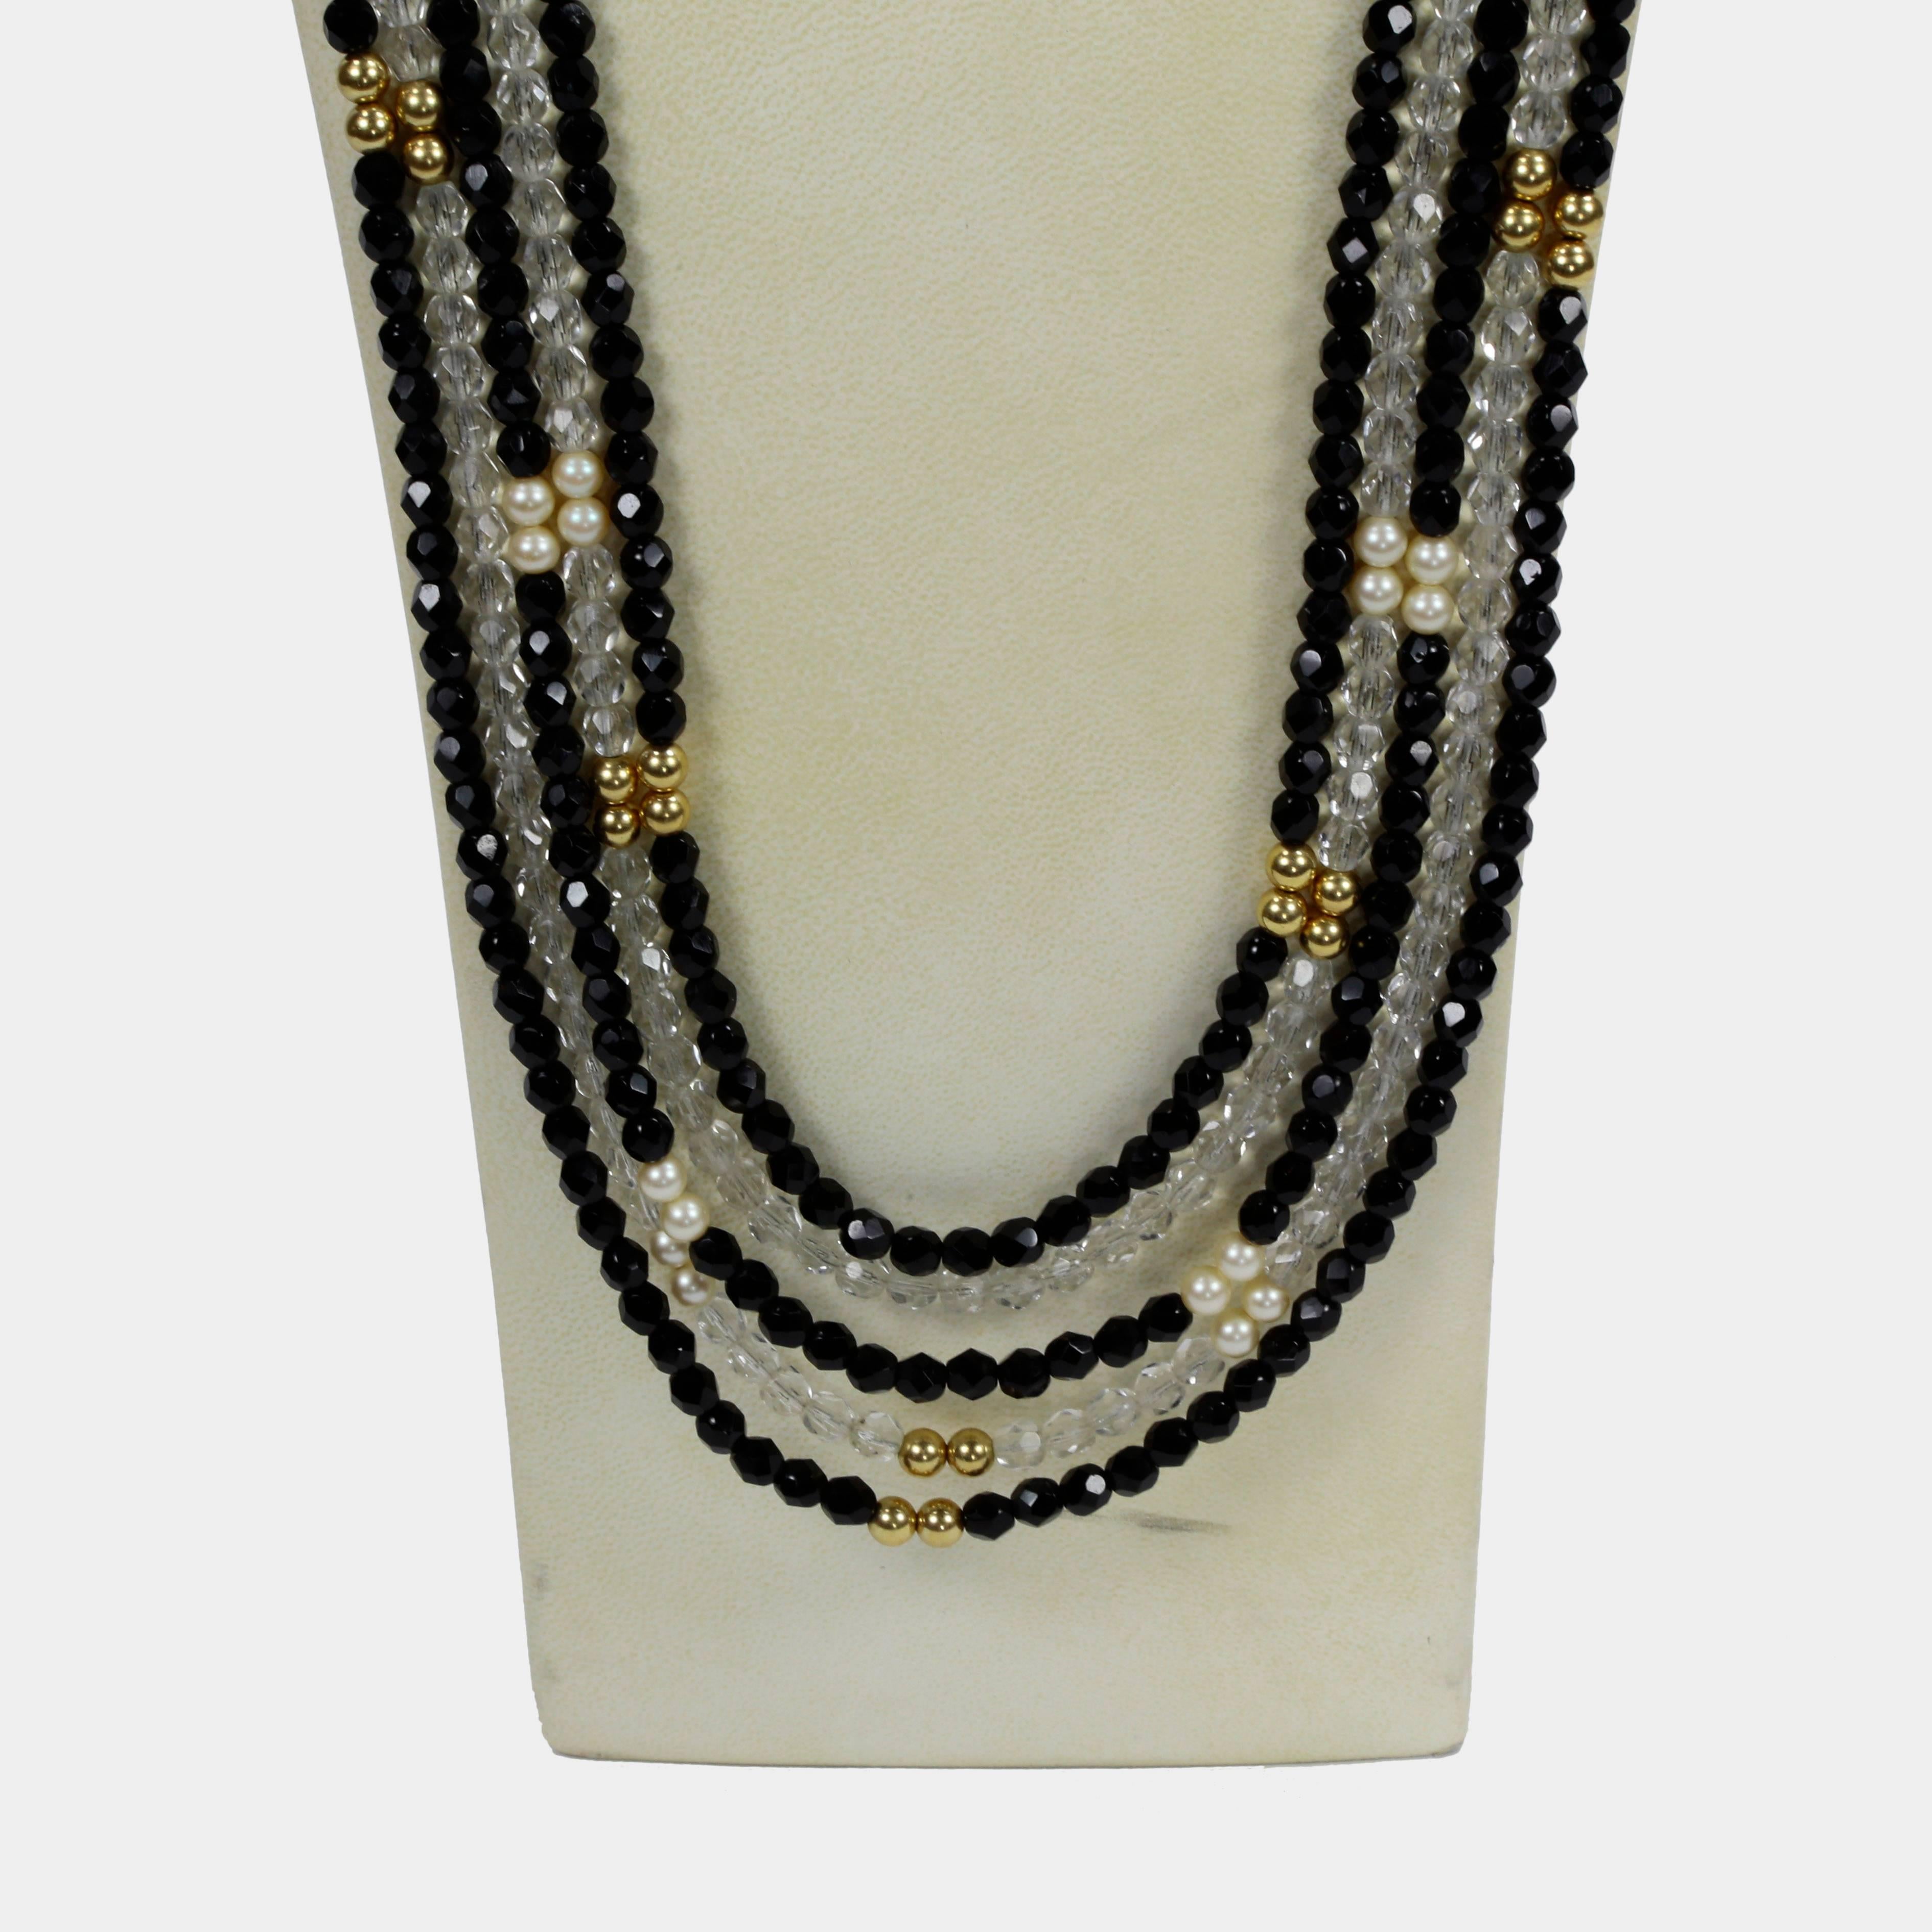 Impressive, yet understated, long eye-catching five strand Chanel inspired Swarovski Crystal beaded Necklace comprising Black, Clear CZ sparkling Czech crystal beads inter-spaced with faux pearl and gold-filled beads. Handmade intricate piece…Unique